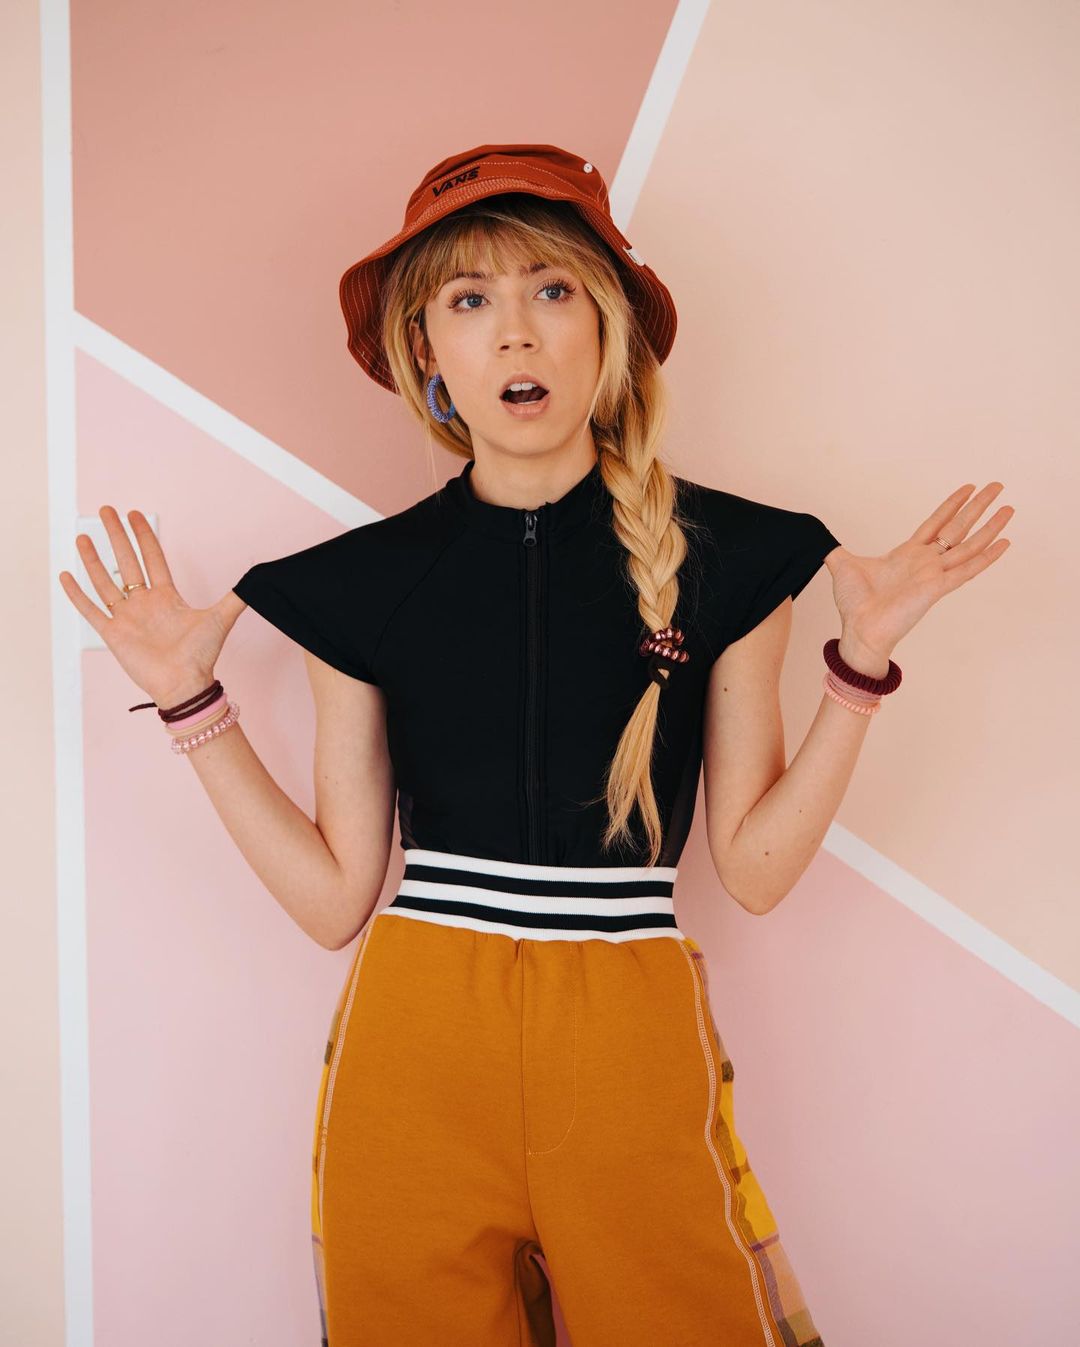 Jennette mccurdy 8 hottest pics, jennette mccurdy 8 instagram